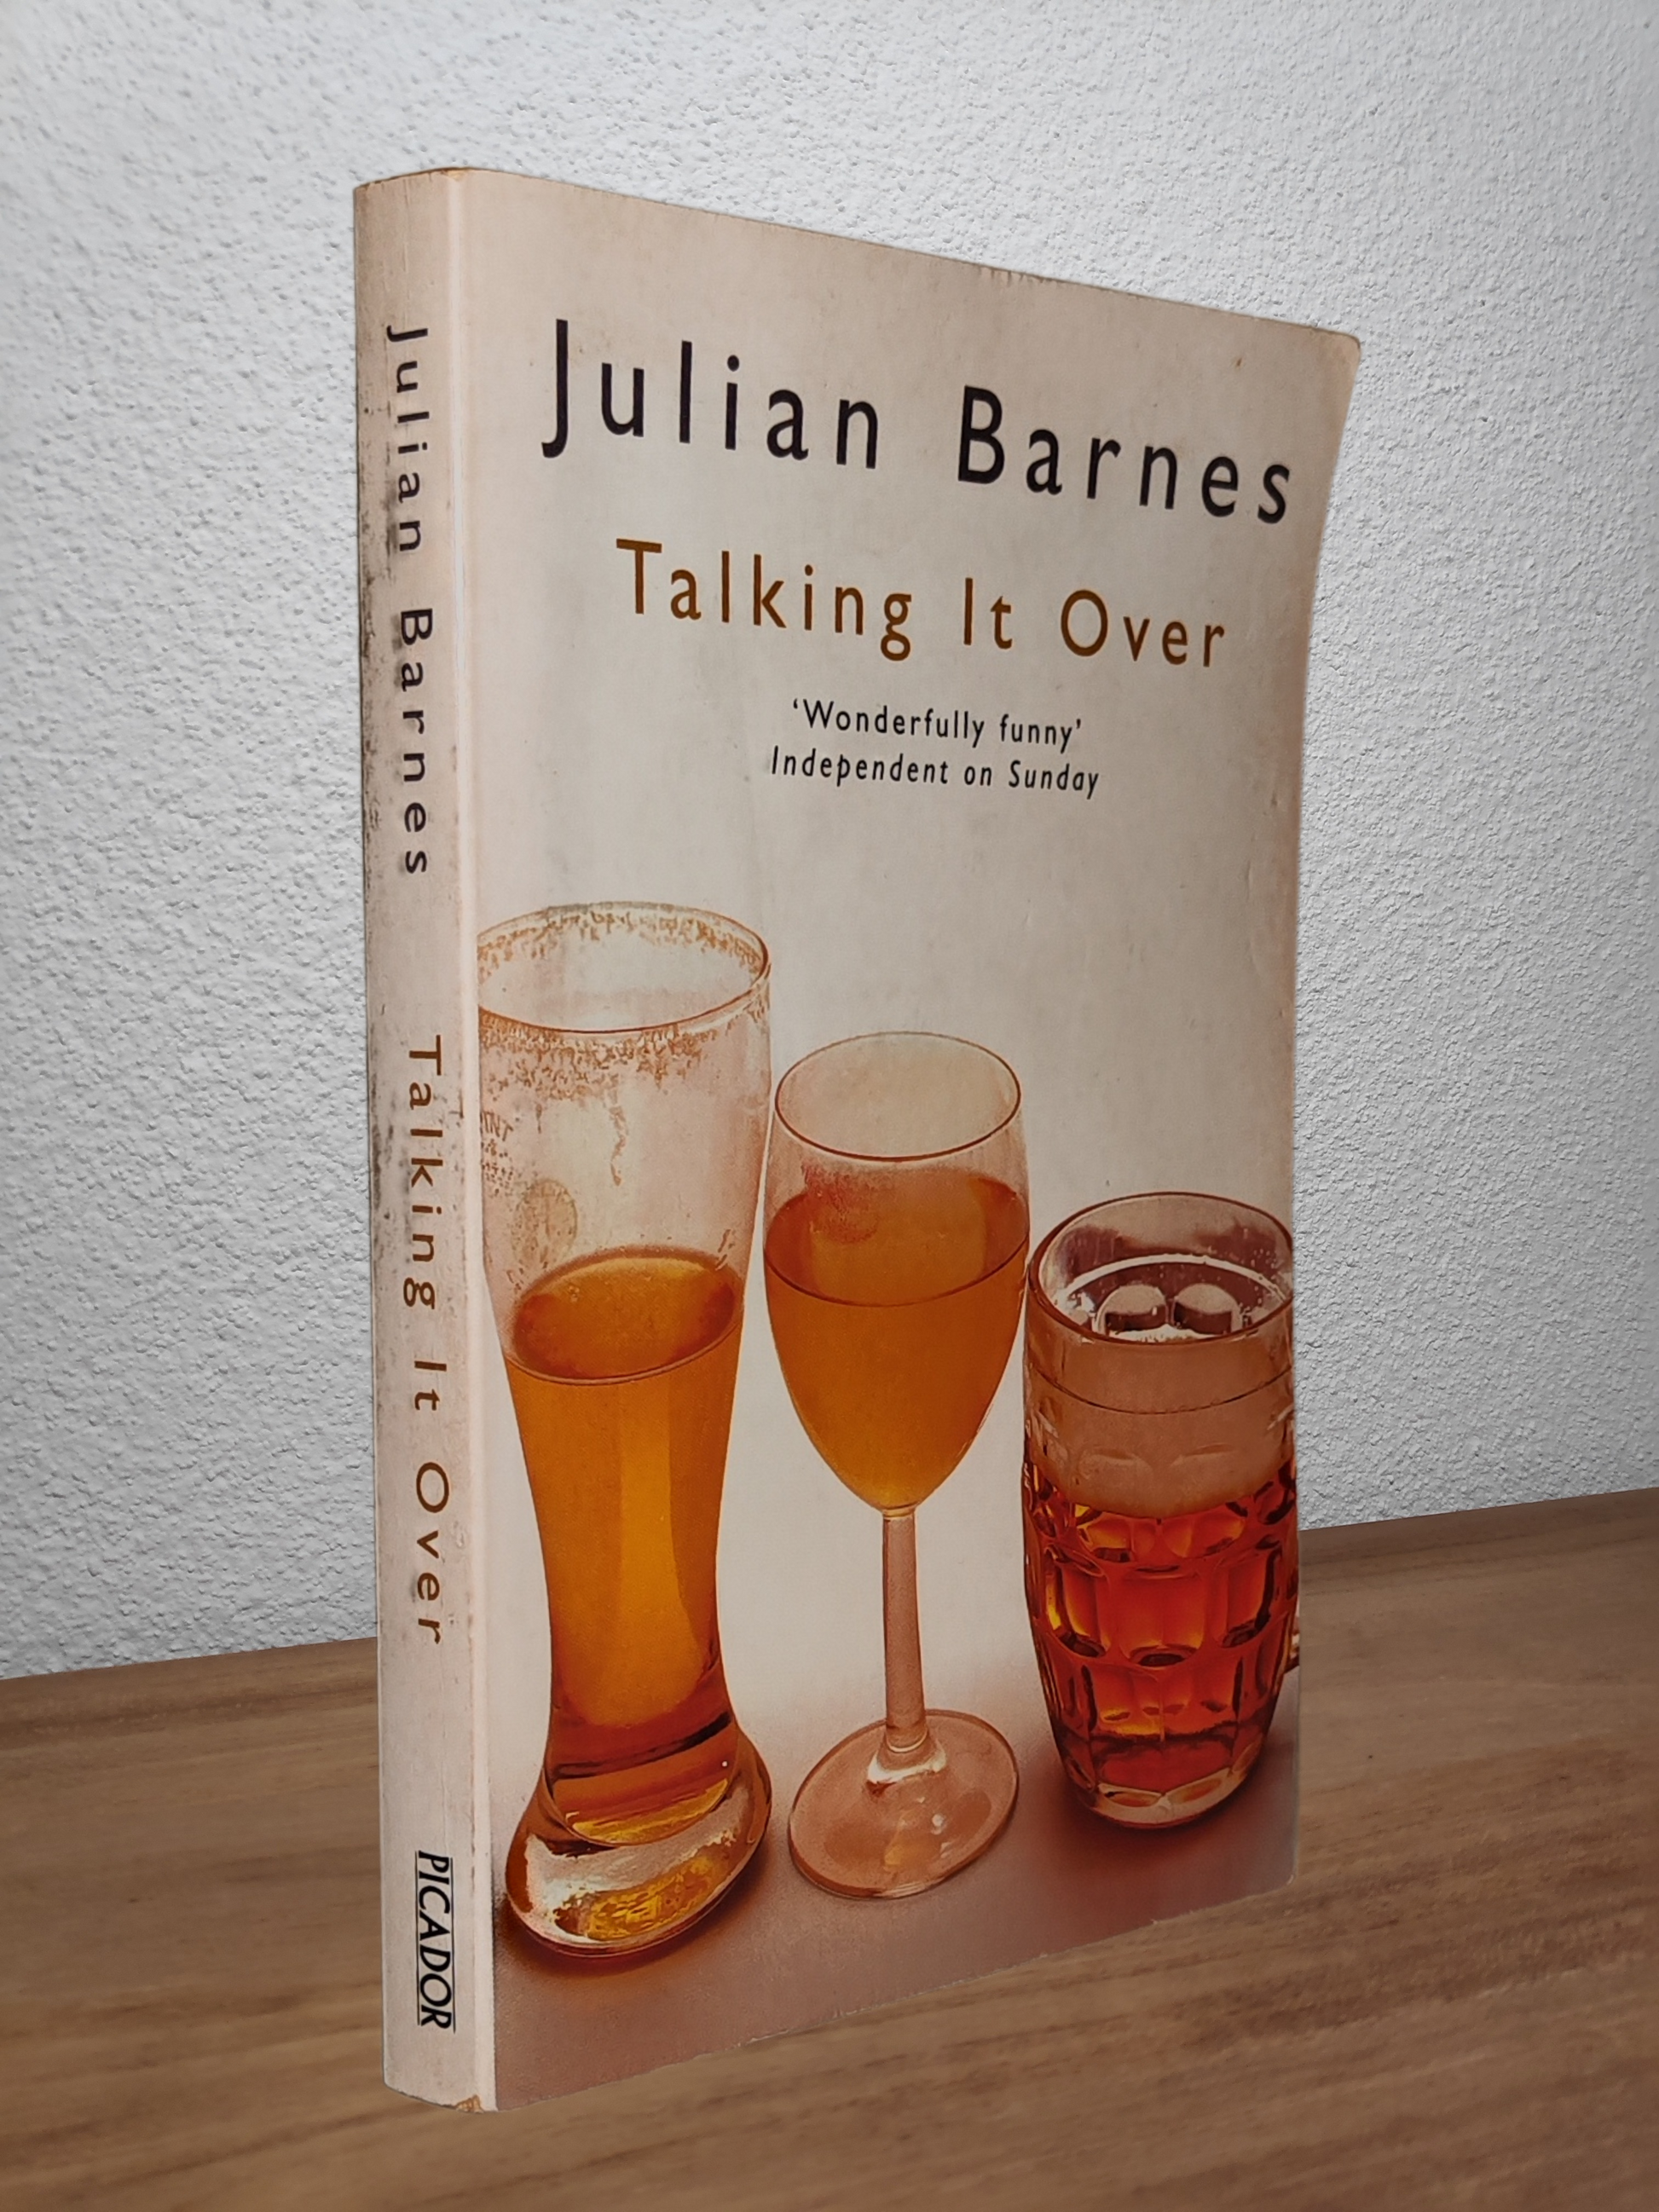 Julian Barnes - Talking It Over  - Second-hand english book to deliver in Zurich & Switzerland